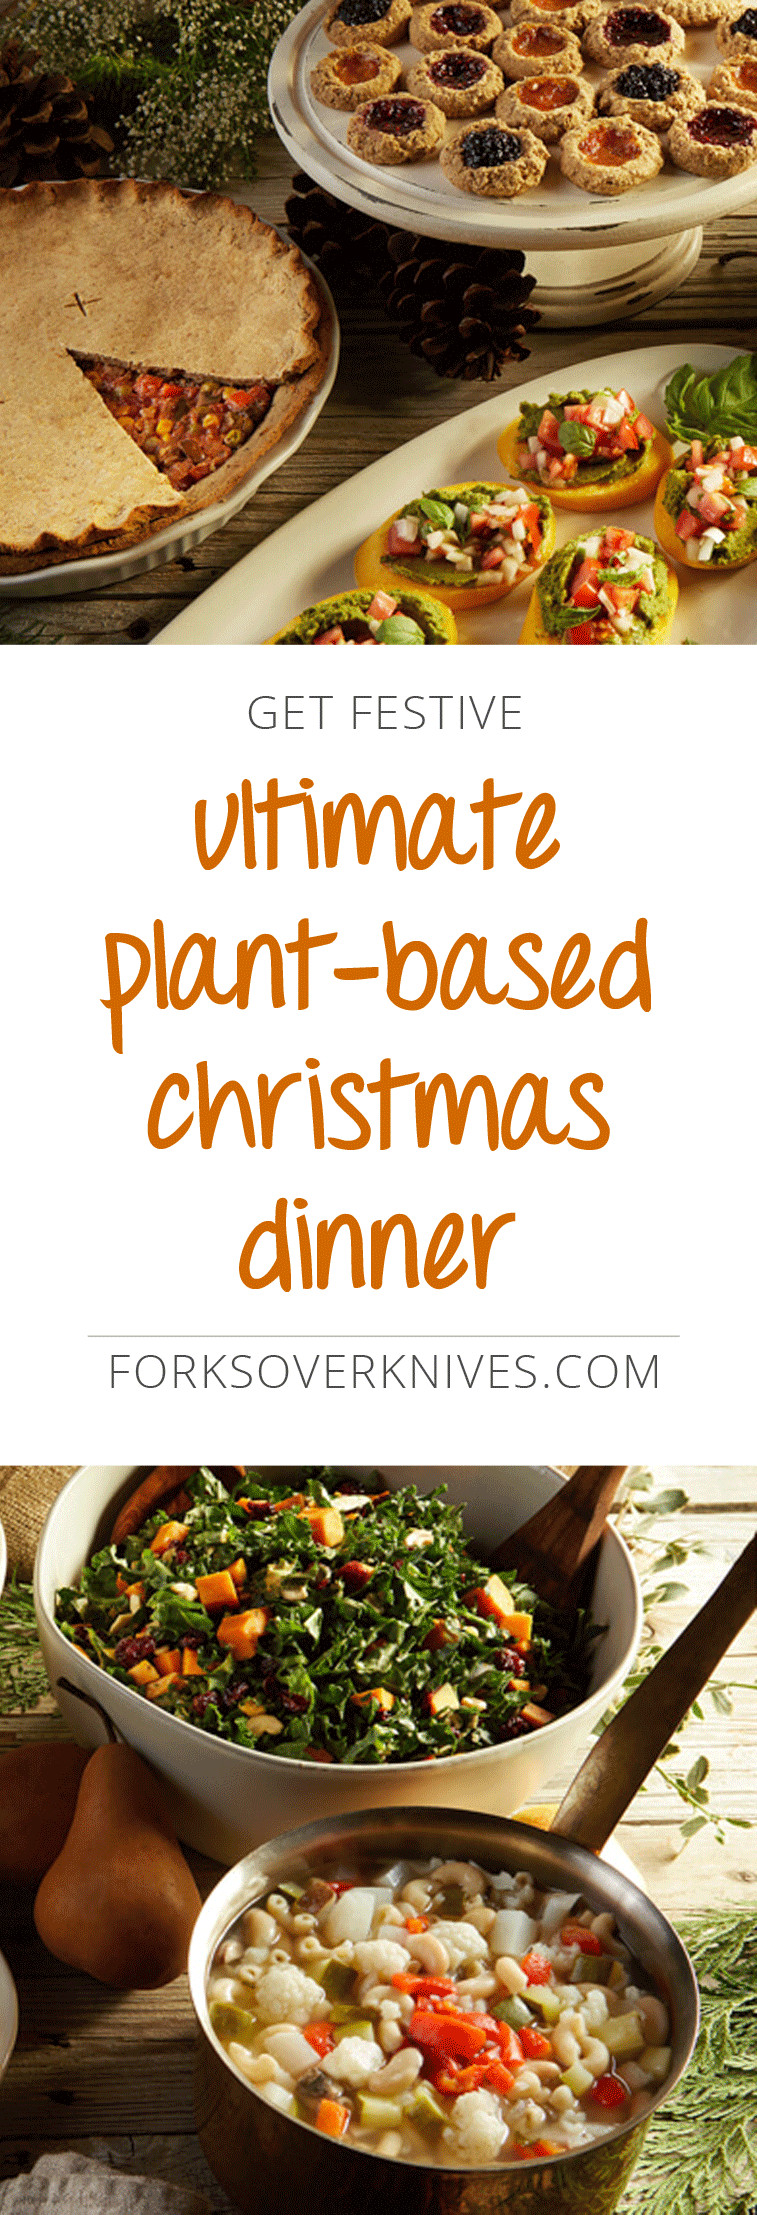 Whole Foods Thanksgiving Dinner 2019
 Ultimate Plant Based Christmas Dinner in 2019